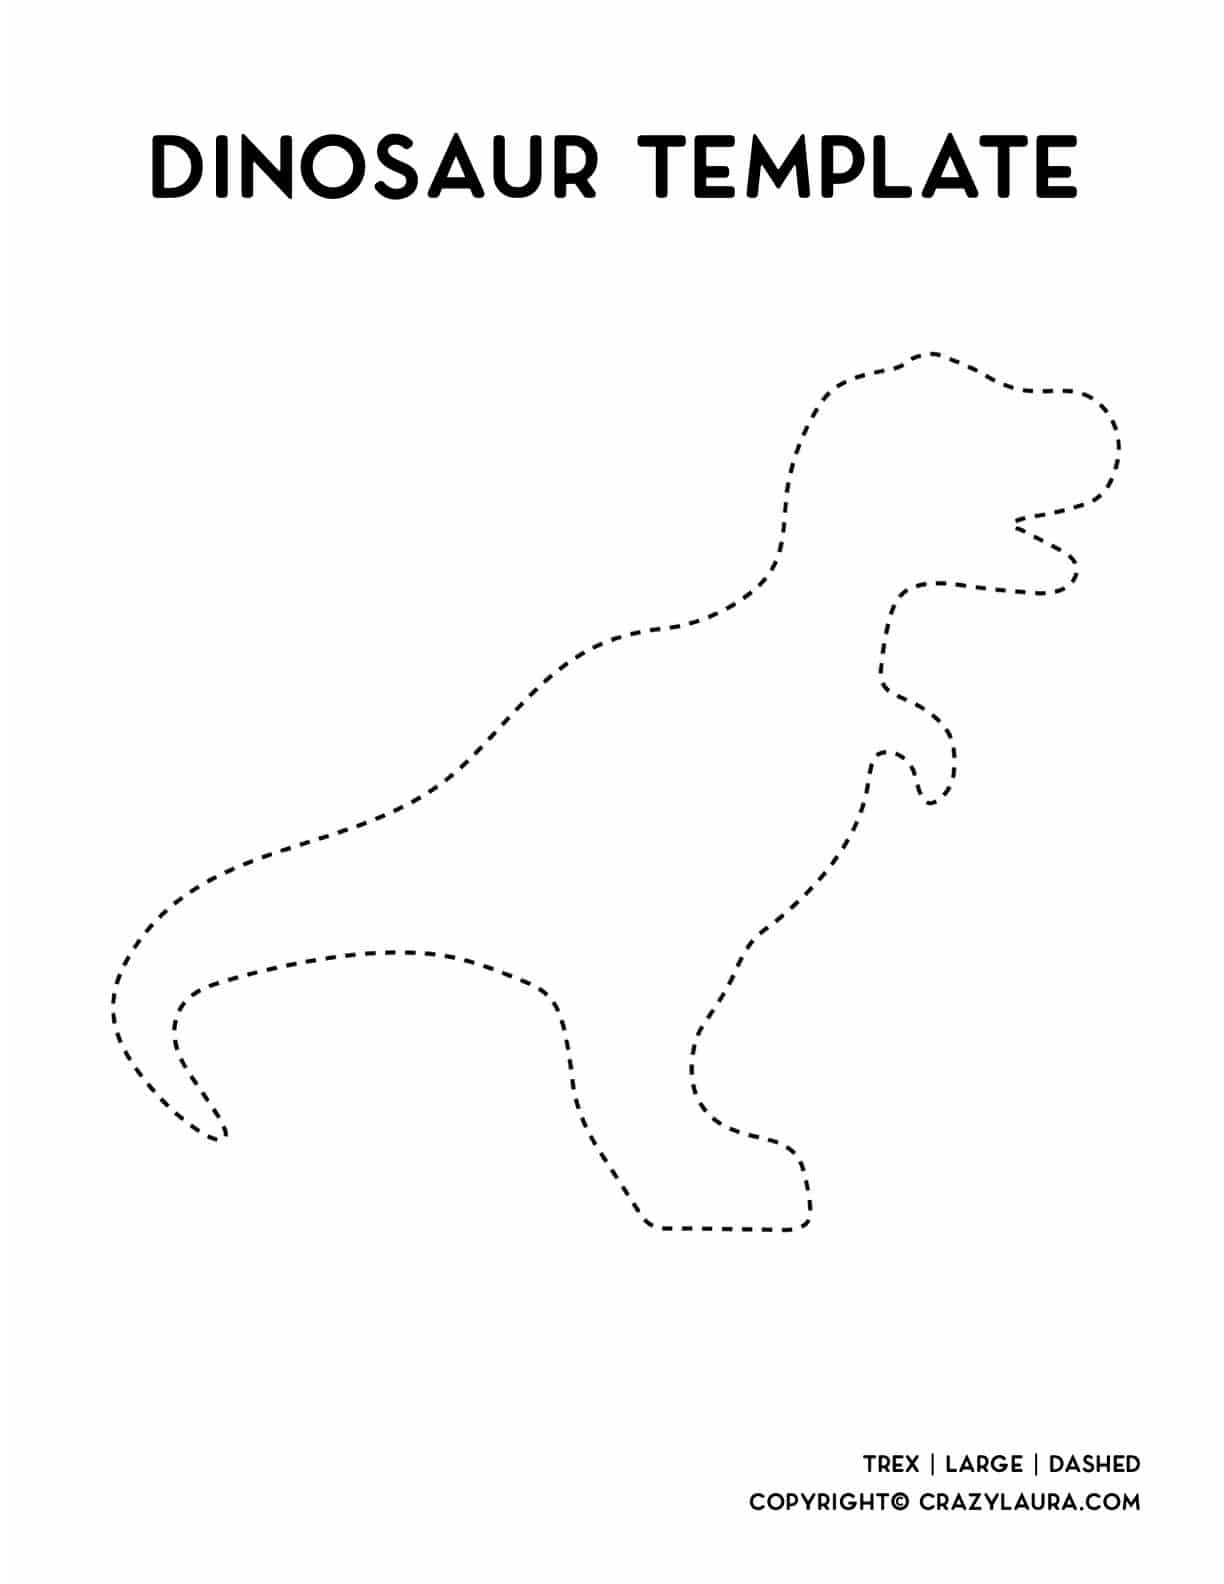 dashed line cutout of trex